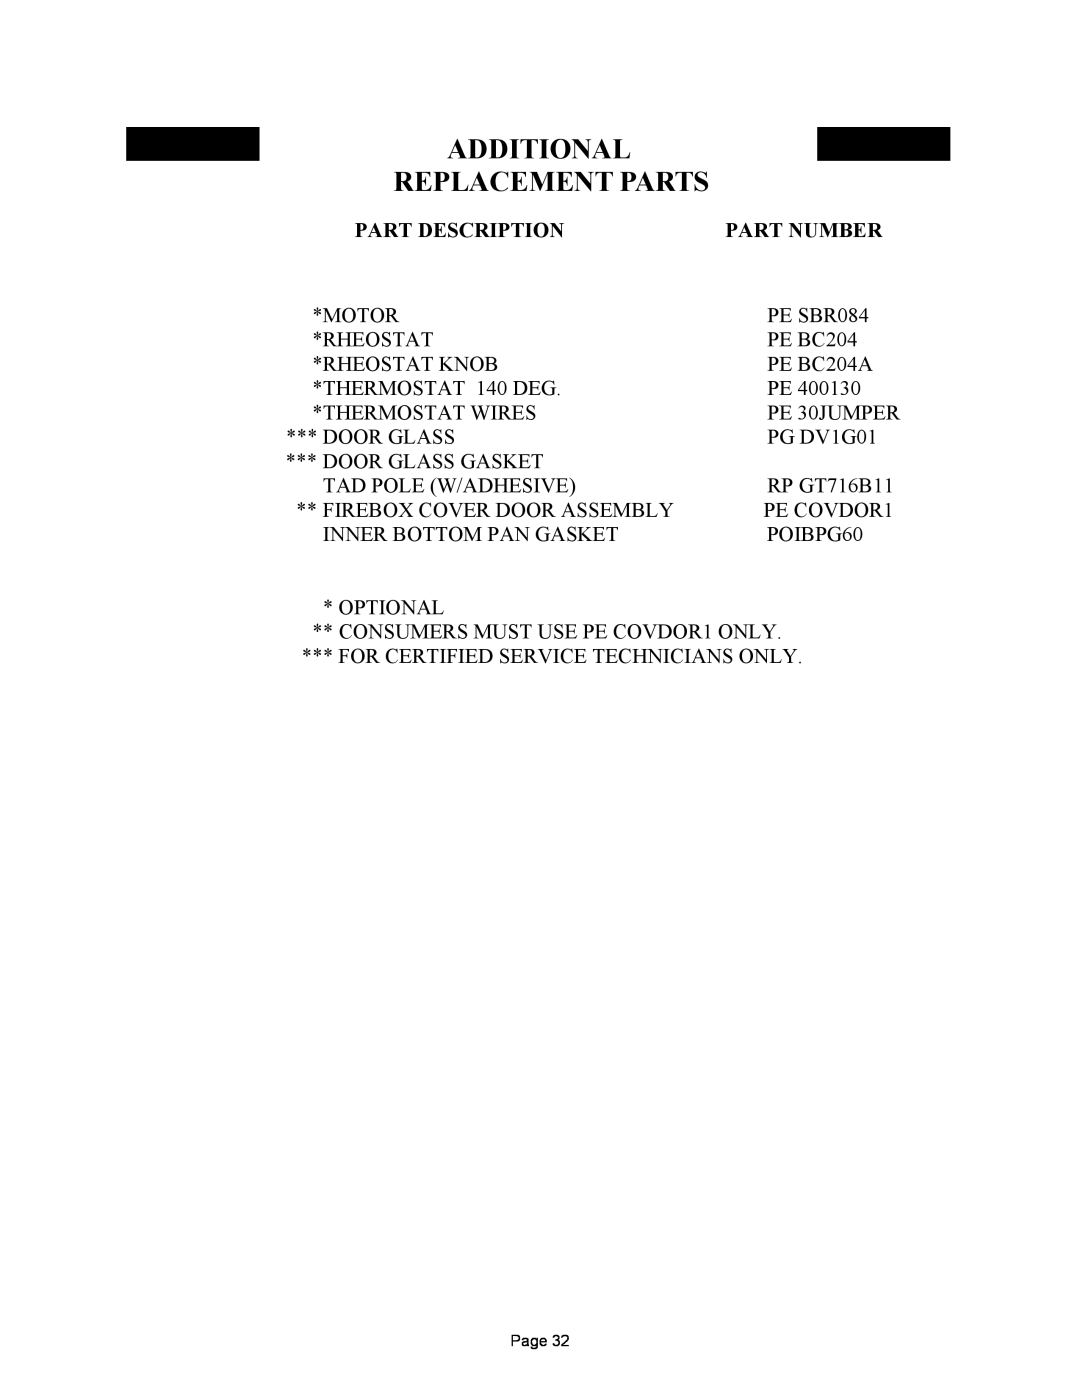 New Buck Corporation DV1000 manual Additional Replacement Parts 